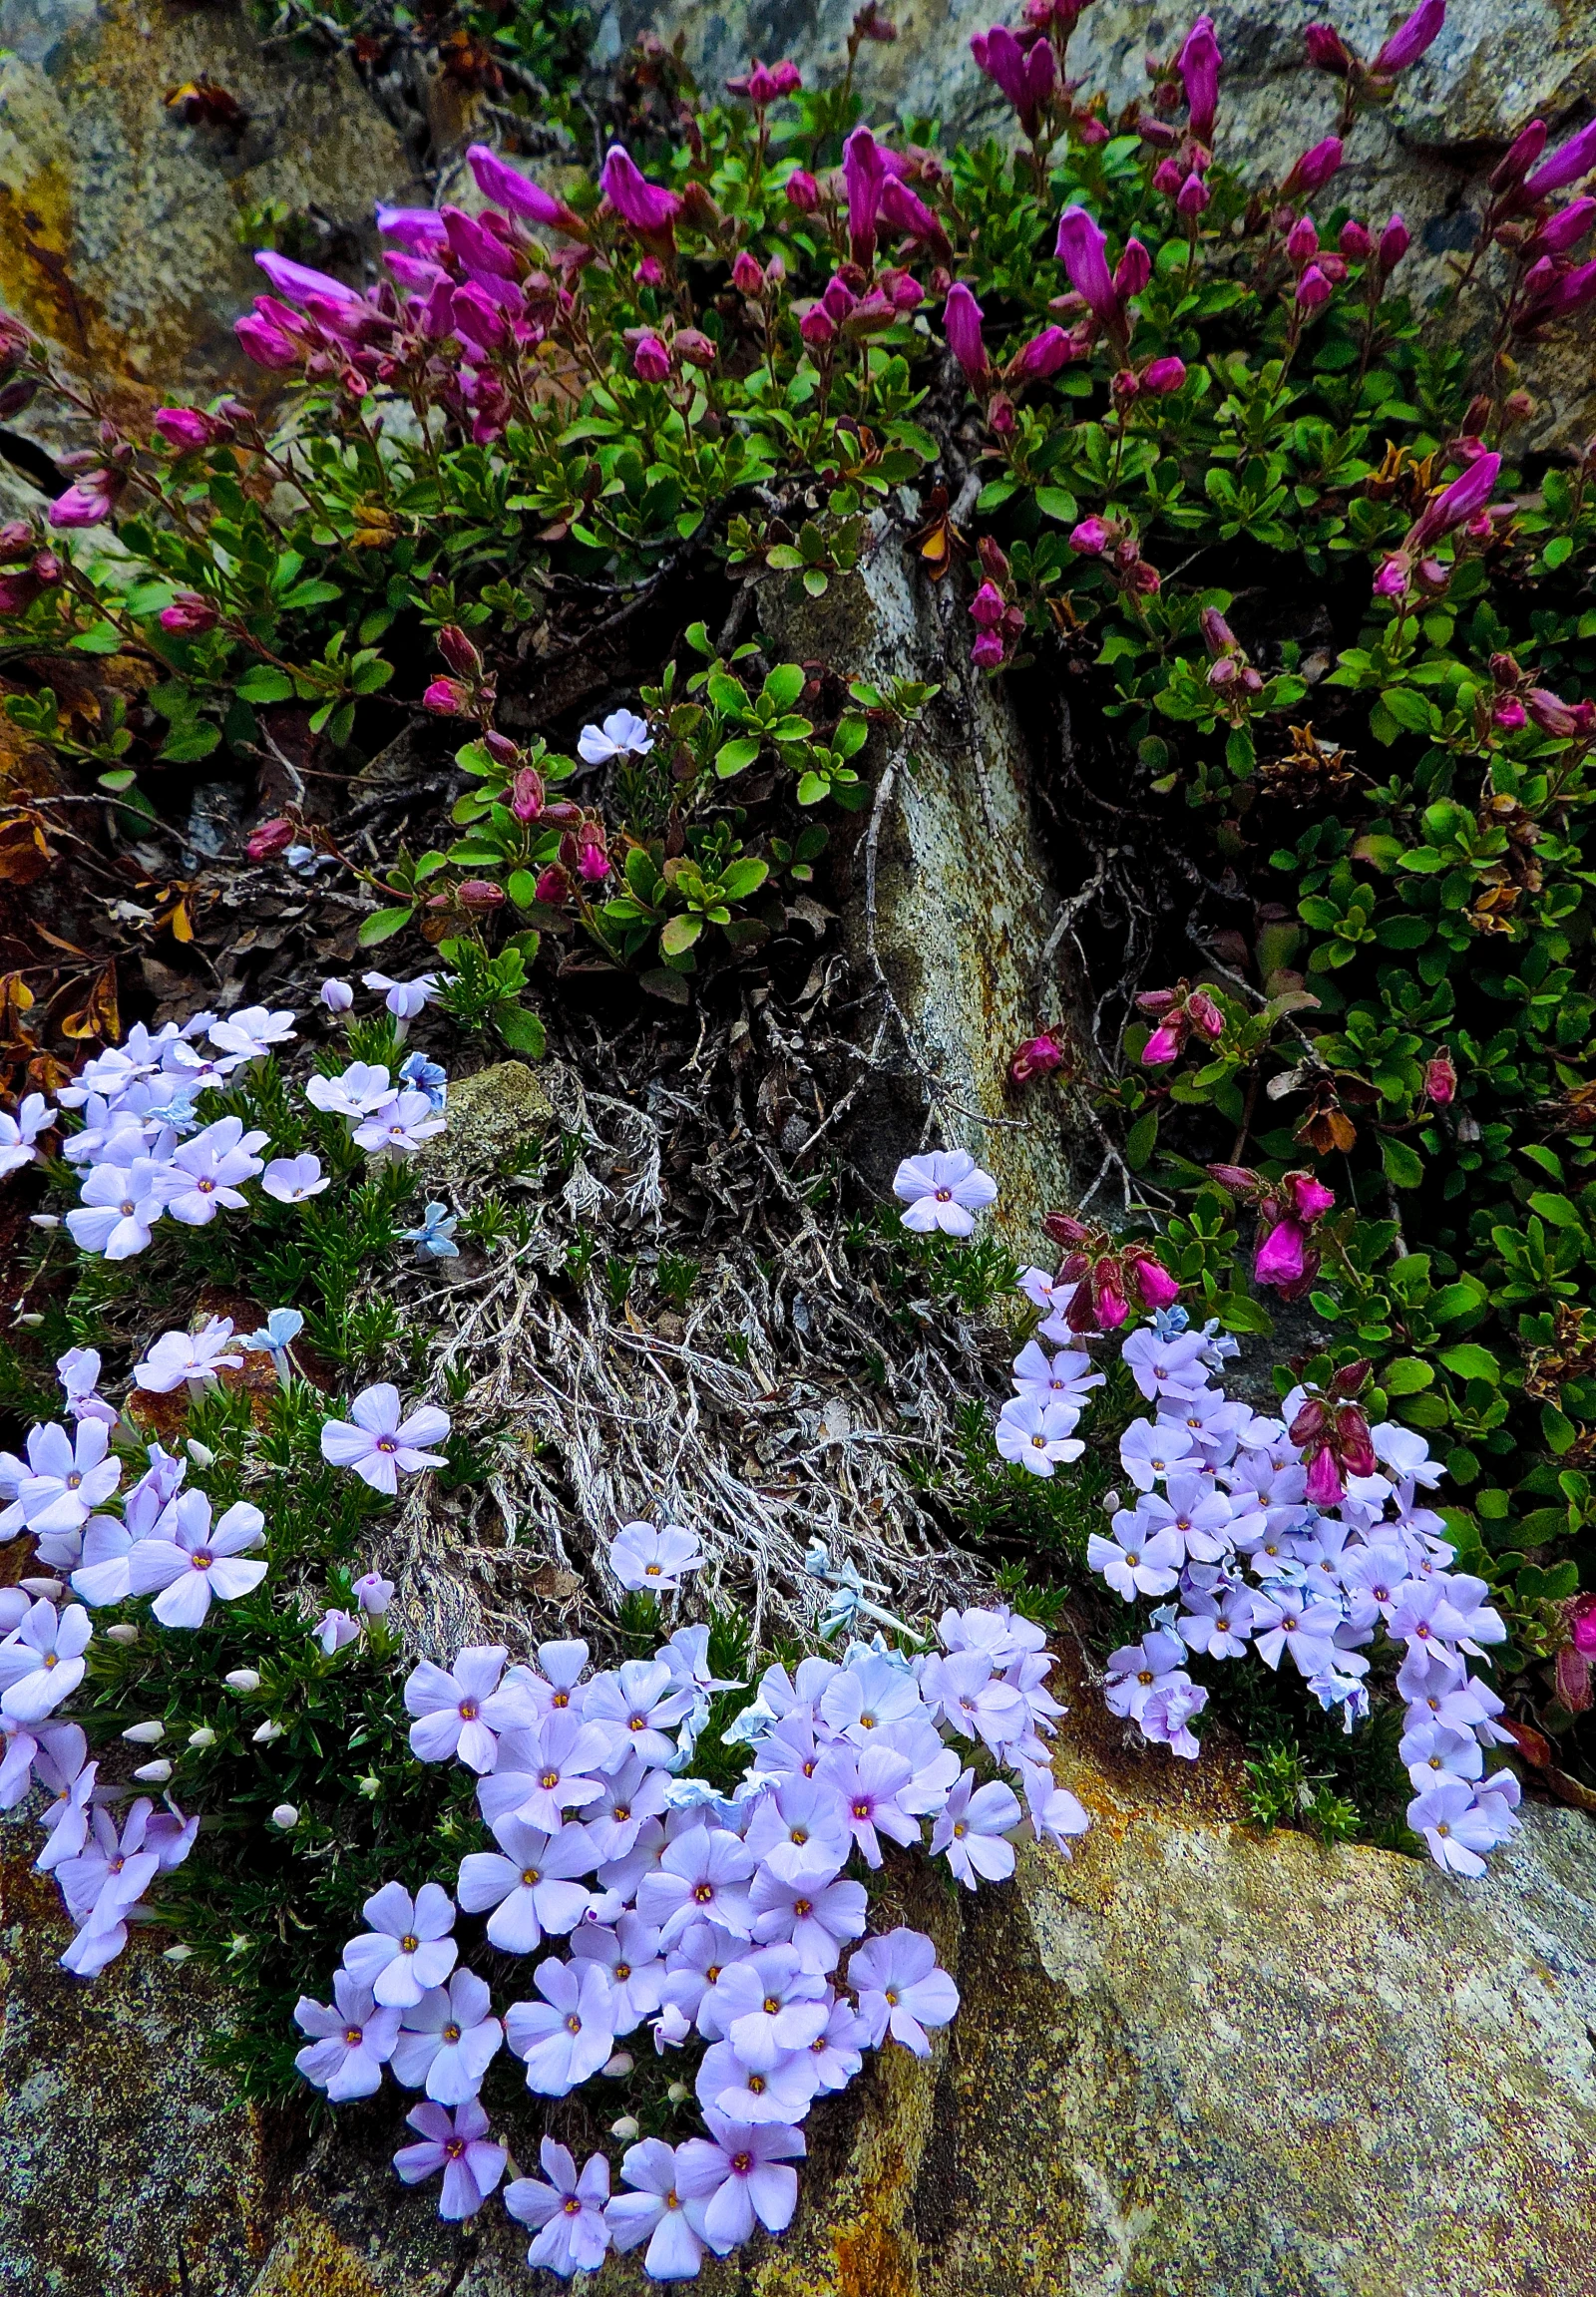 the pink flowers and green planters are growing on the rocks